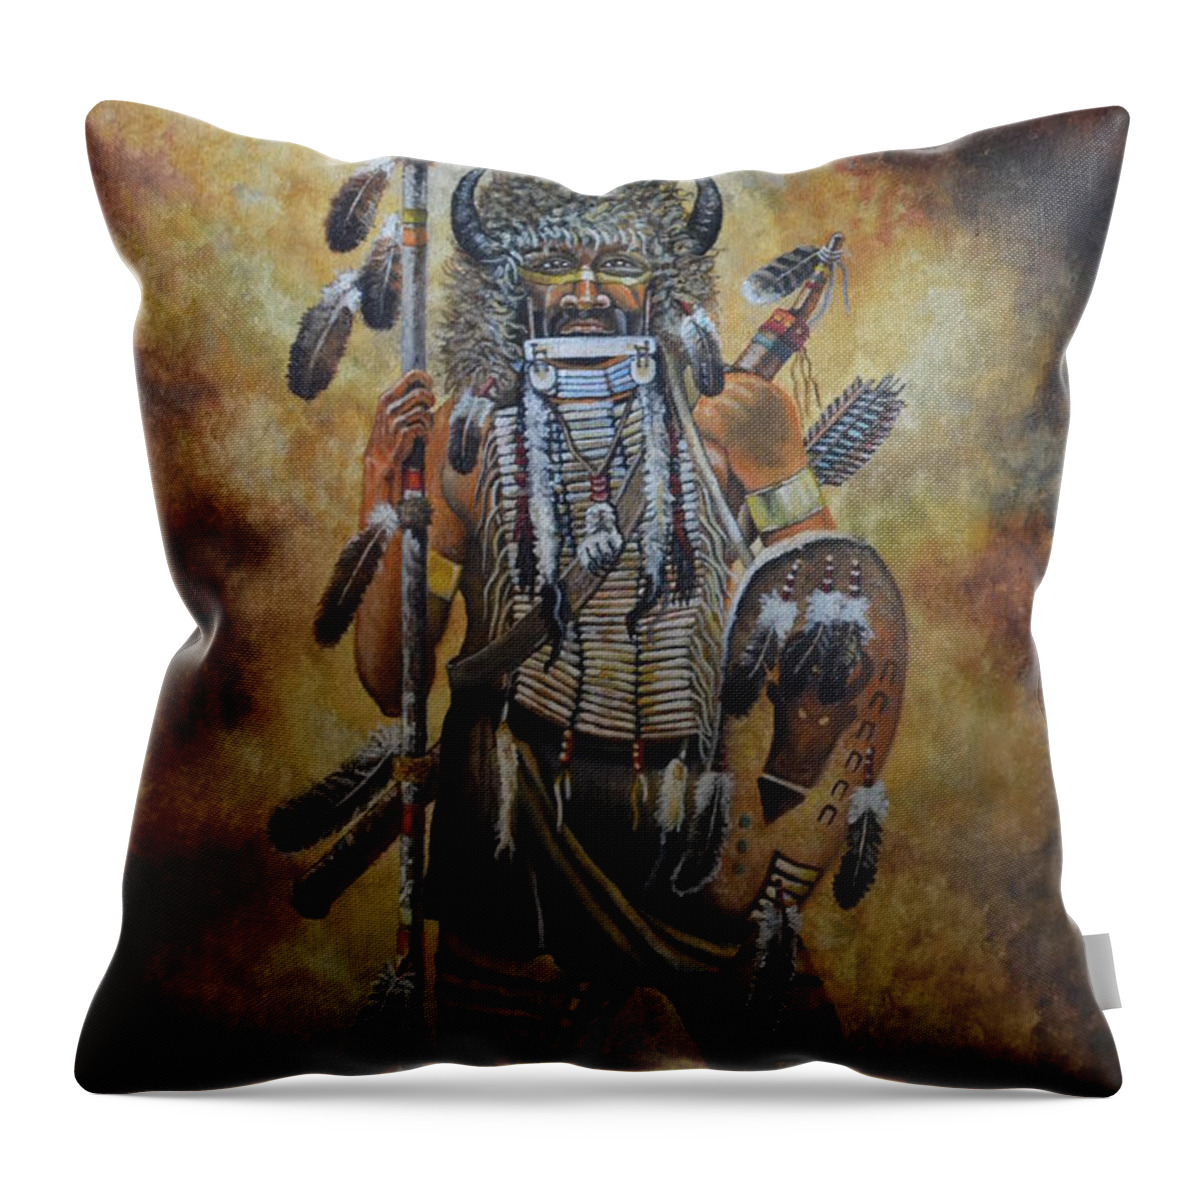 A Portrait Of Two Crows A Cheyenne Warrior Who Fought Against The 7th Cavalary. He Is Wearing His Buffalo Hat And Has Is Spear Throw Pillow featuring the painting Two Crows by Martin Schmidt